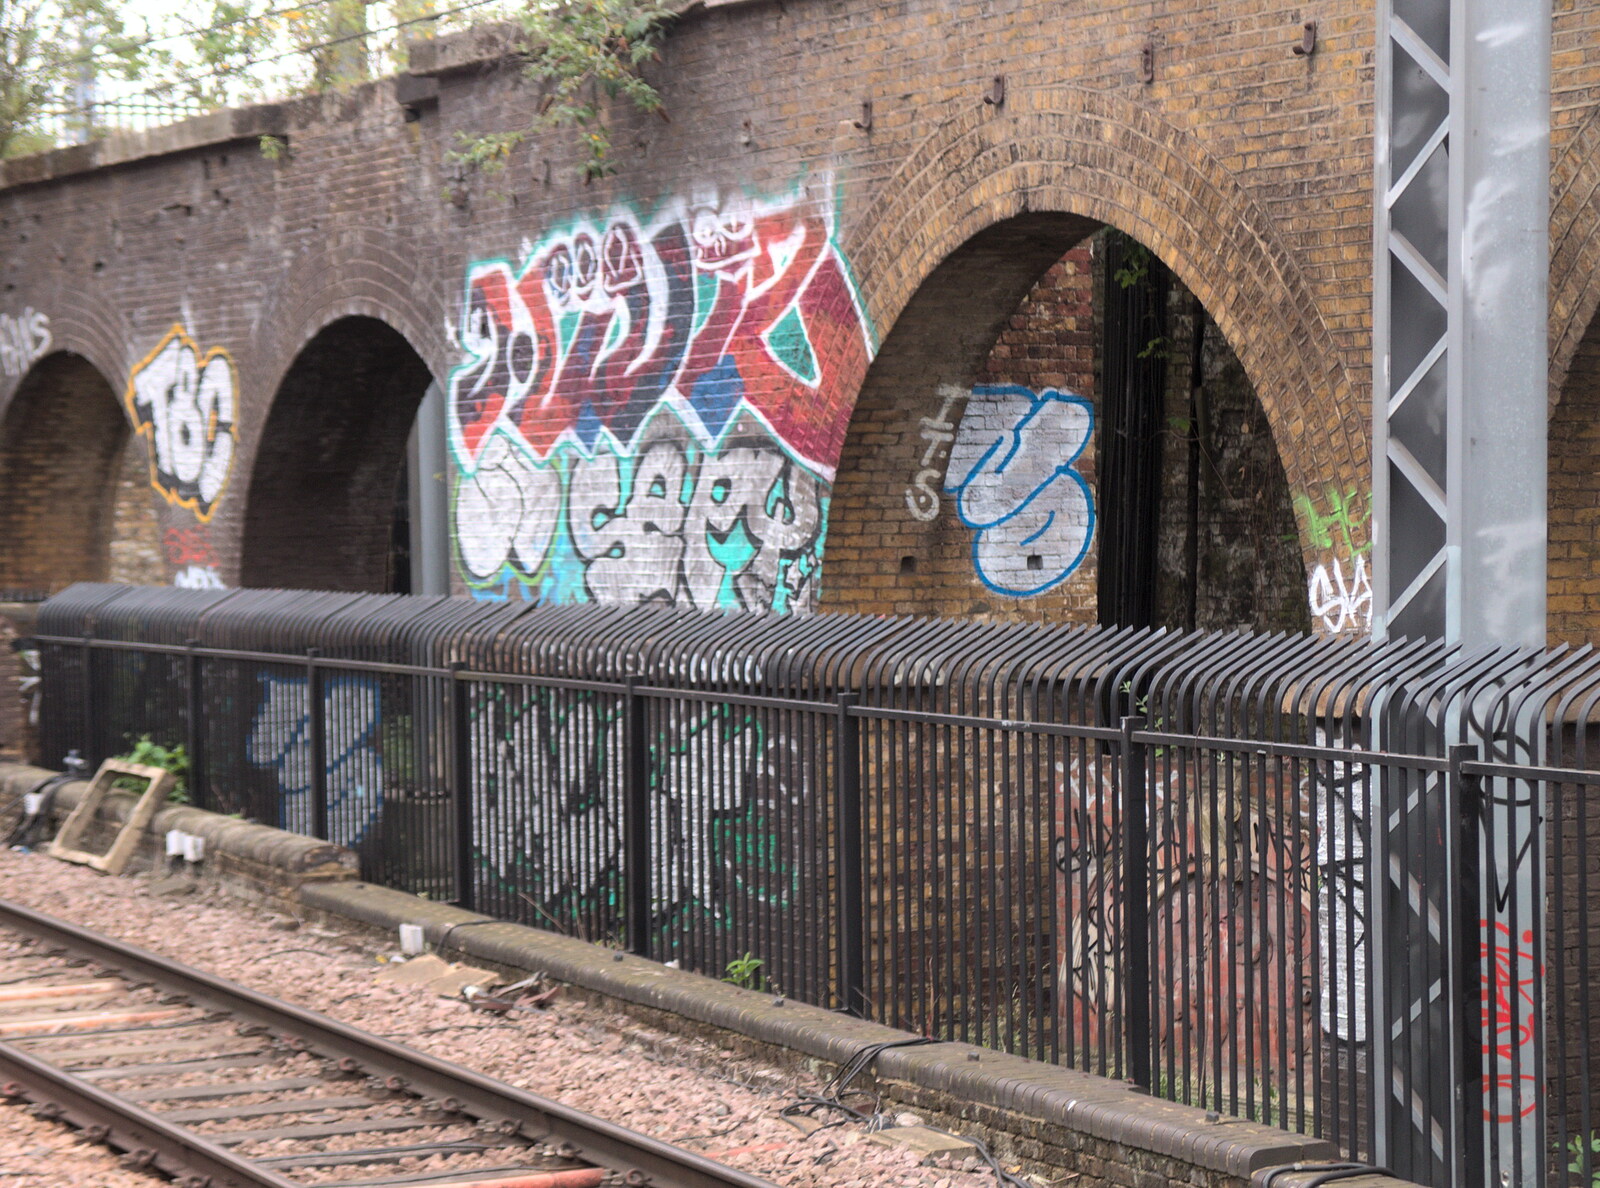 Colourful tags on the railway arches from SwiftKey's Hundred Million, Paddington, London - 13th June 2018